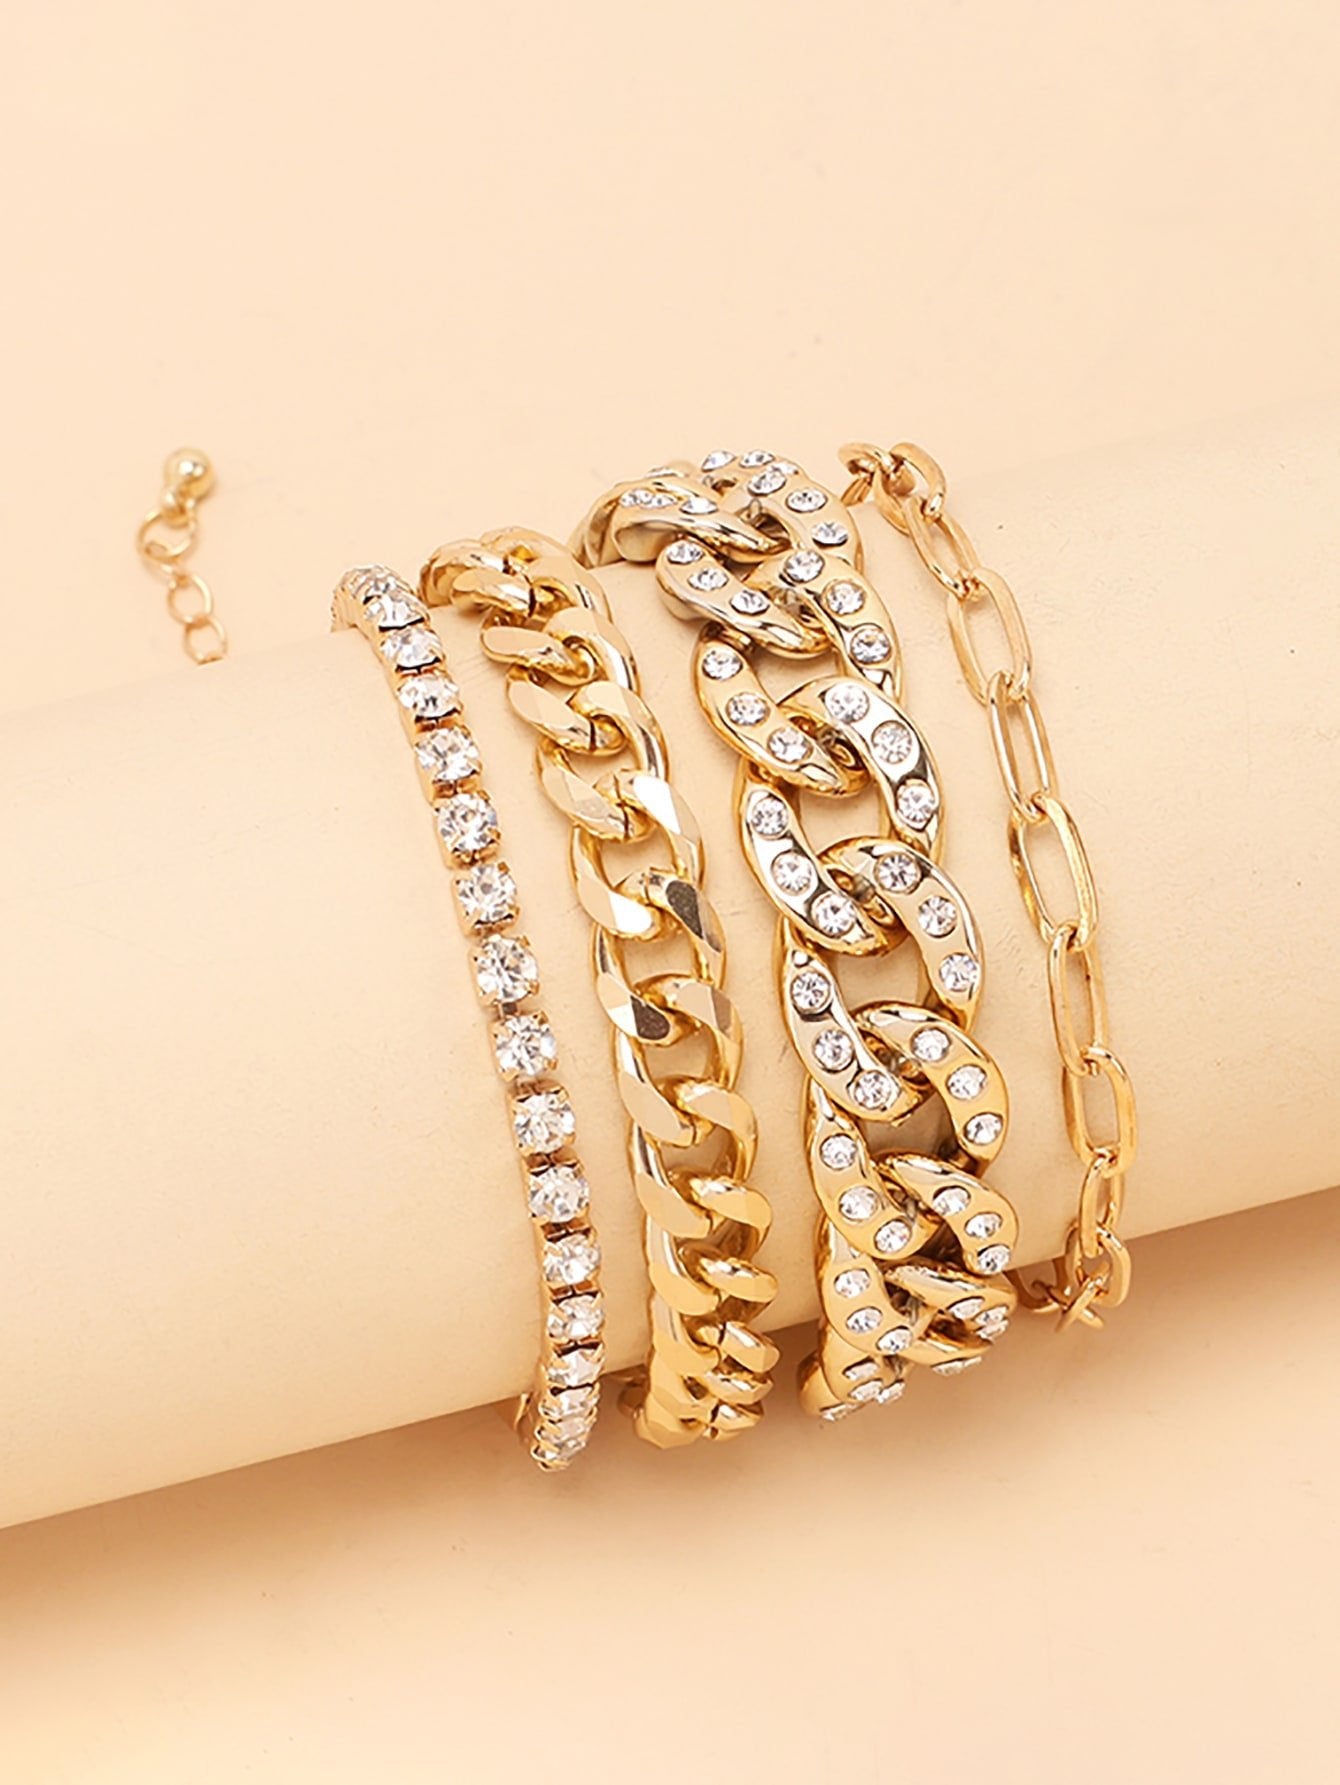 4pcs Punk Style Exaggerated Bracelet Set Made Of Plastic, Cubic Zirconia And Copper - Negative Apparel